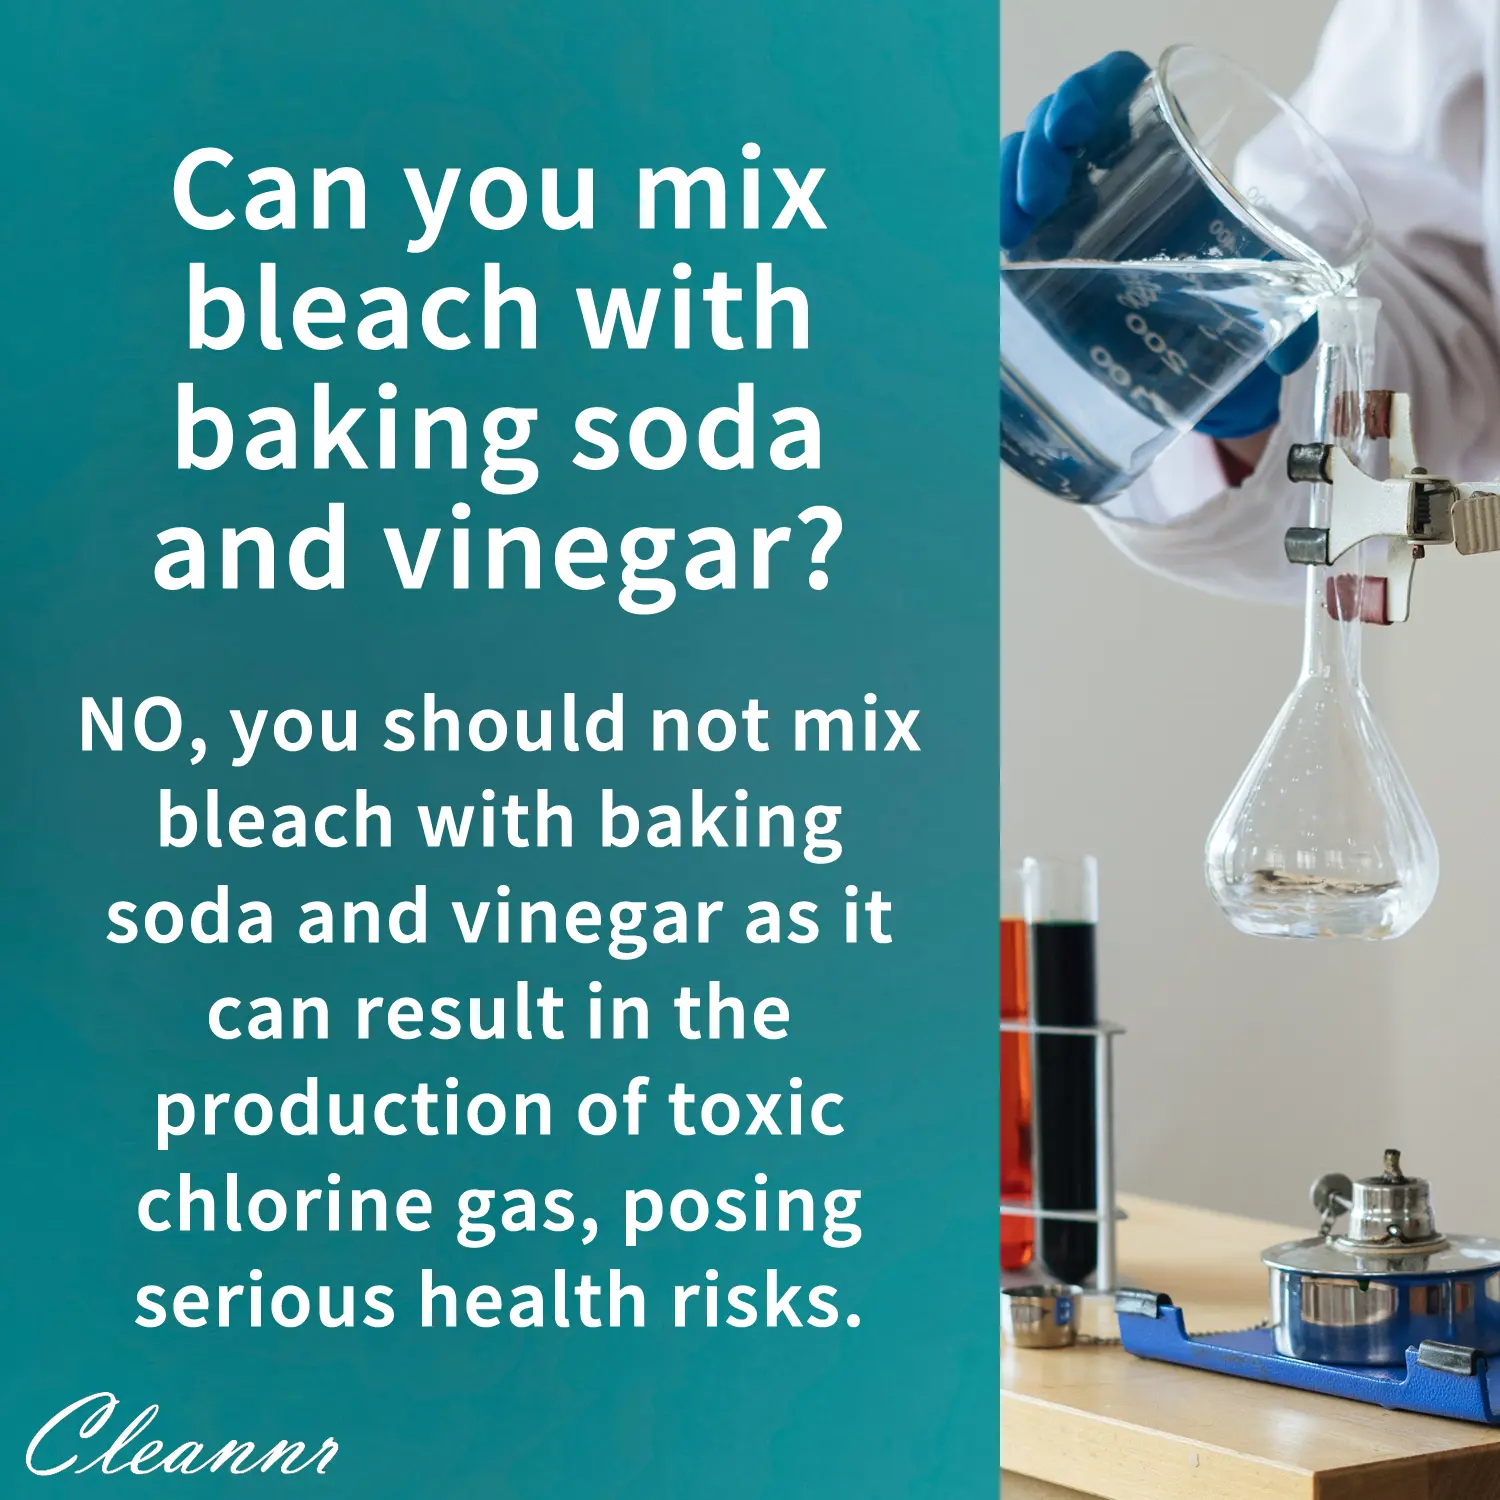 Can You Mix Bleach With Baking Soda and Vinegar